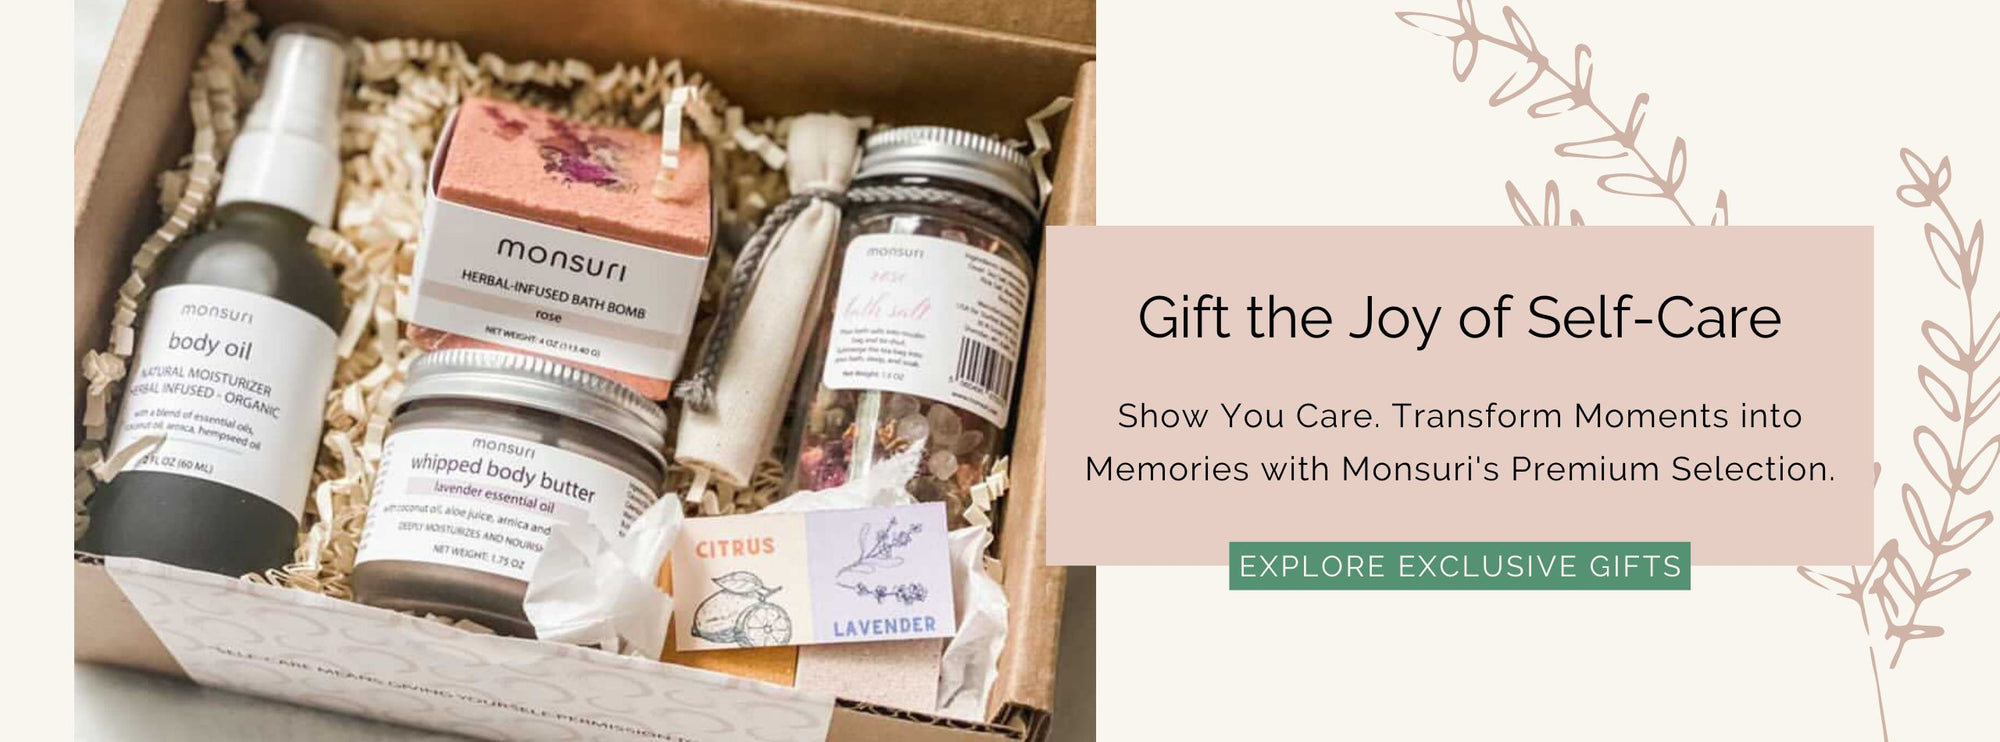 Thoughtful Self-Care Gifts Collection - Premium Monsuri Products for Wellness and Relaxation